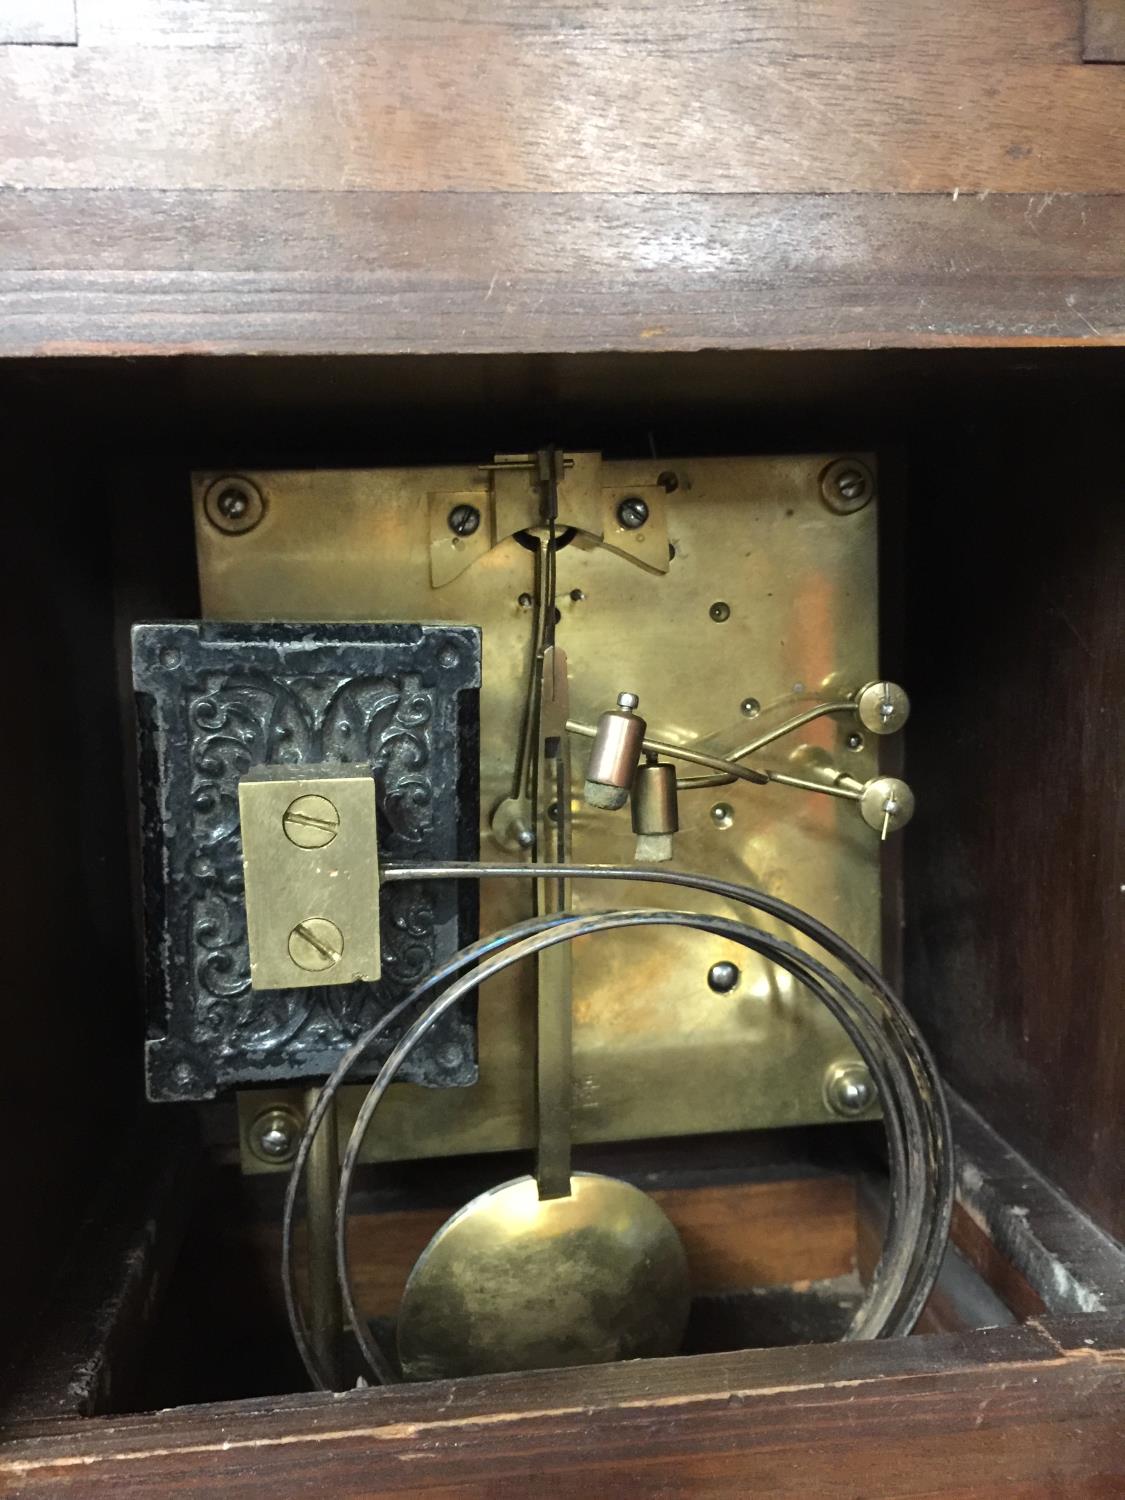 TWO VINTAGE MAHOGANY CASED MANTLE CLOCKS, BOTH WITH KEYS AND PENDULUMS - Image 5 of 5